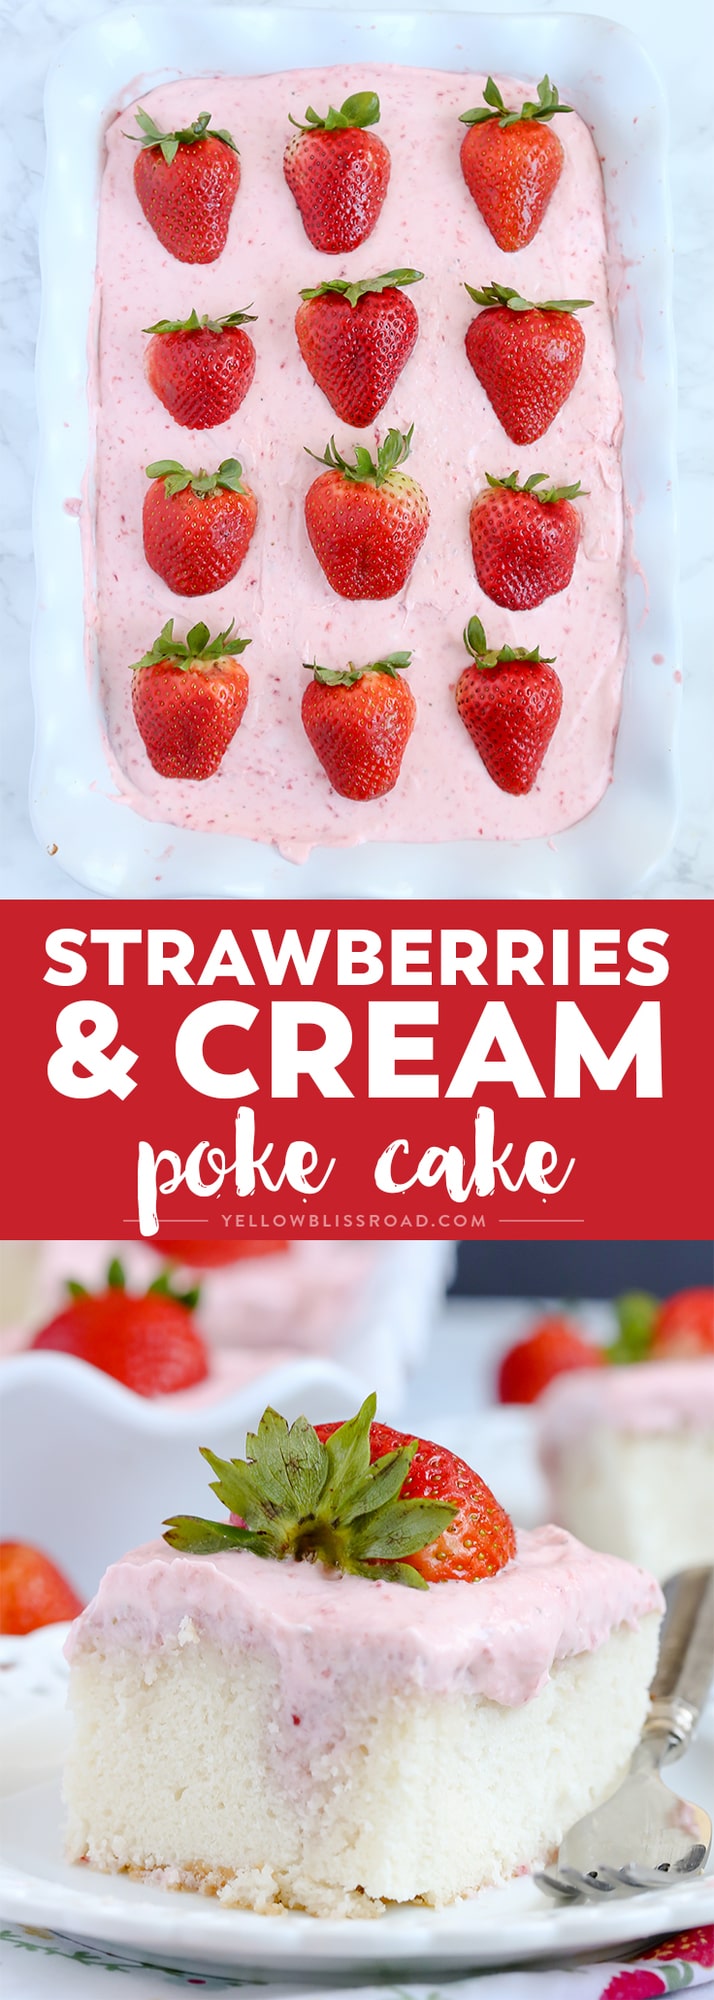 This Strawberries and Cream Poke Cake takes full advantage of Strawberry season with tons of fresh strawberries in the filling and the frosting. It's a strawberry lovers dream dessert!